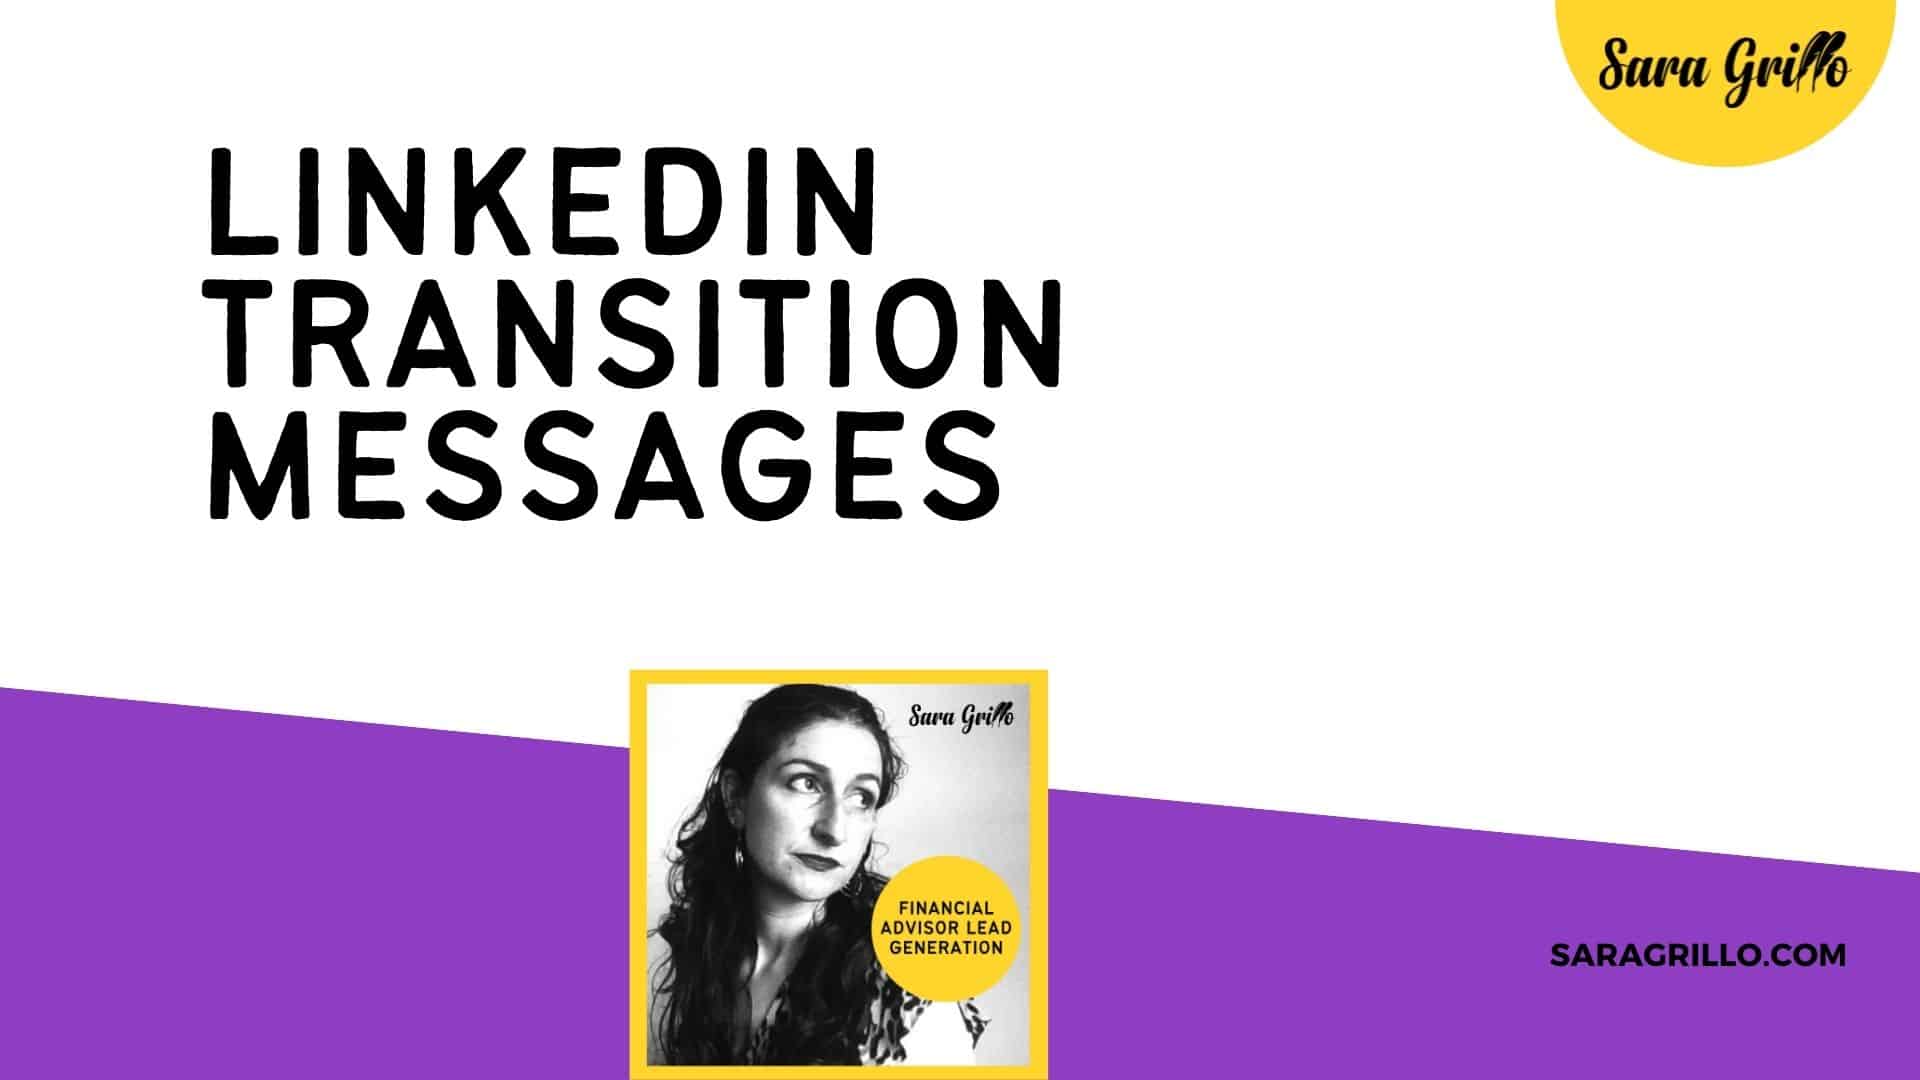 This blog is about LinkedIn transition messages.